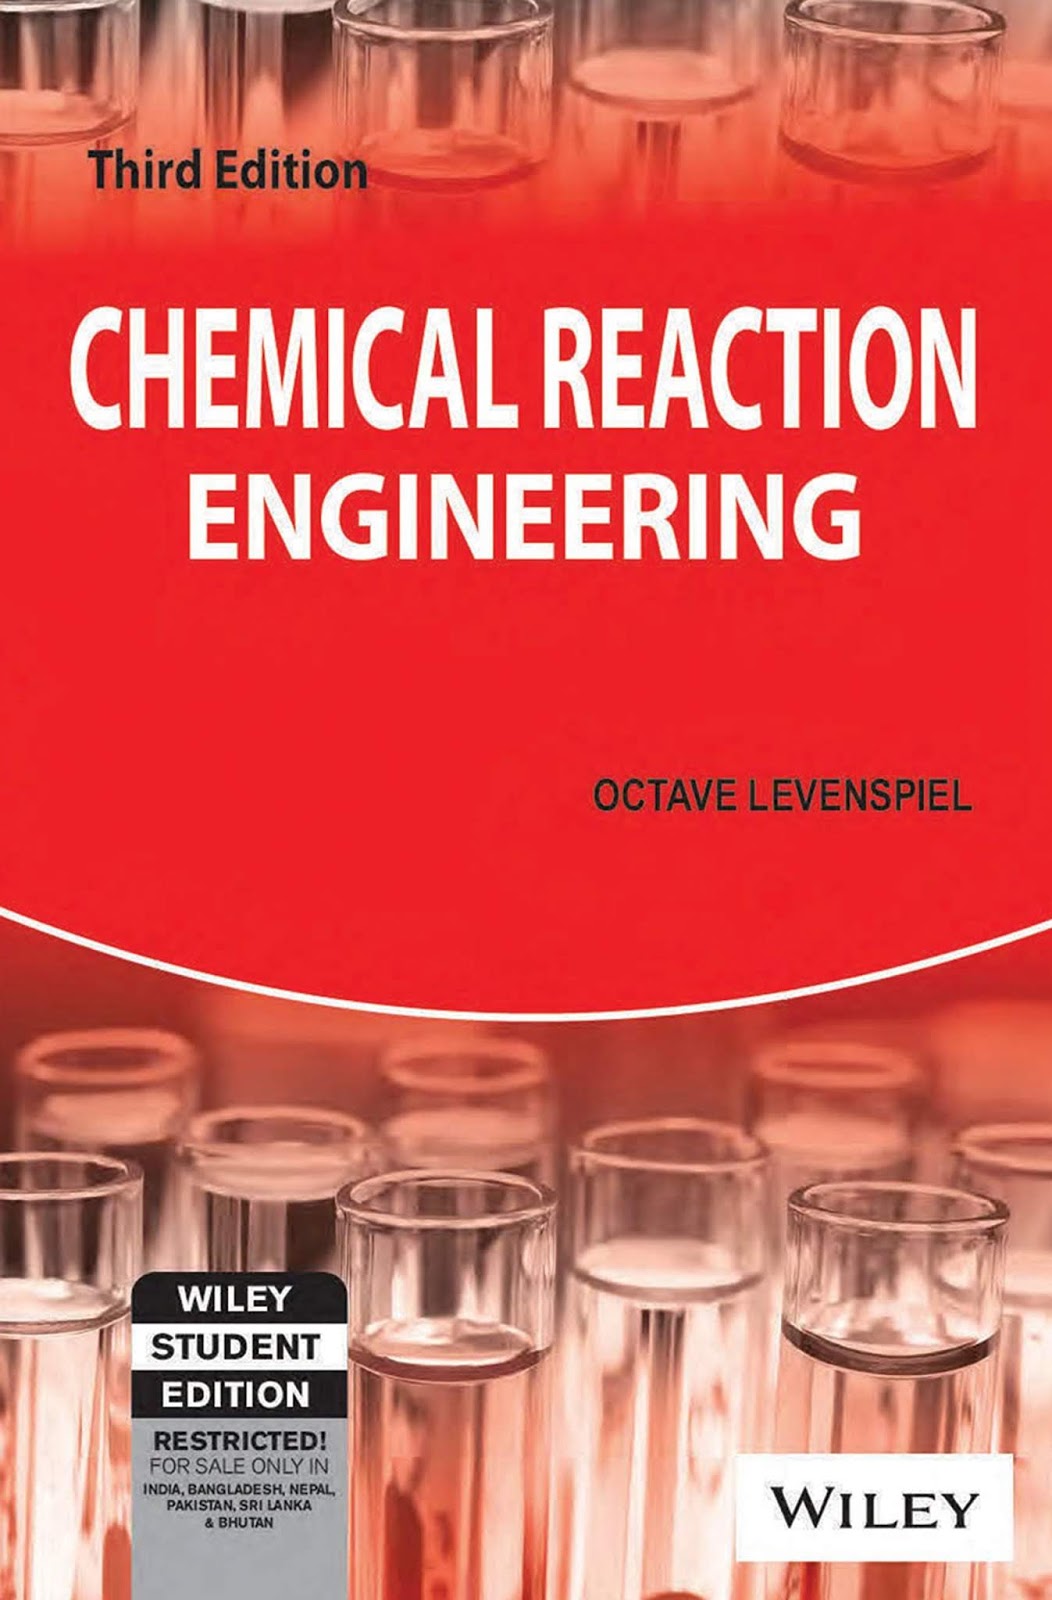 Download Chemical Reaction Engineering Third Edition Octave Levenspiel Book Pdf